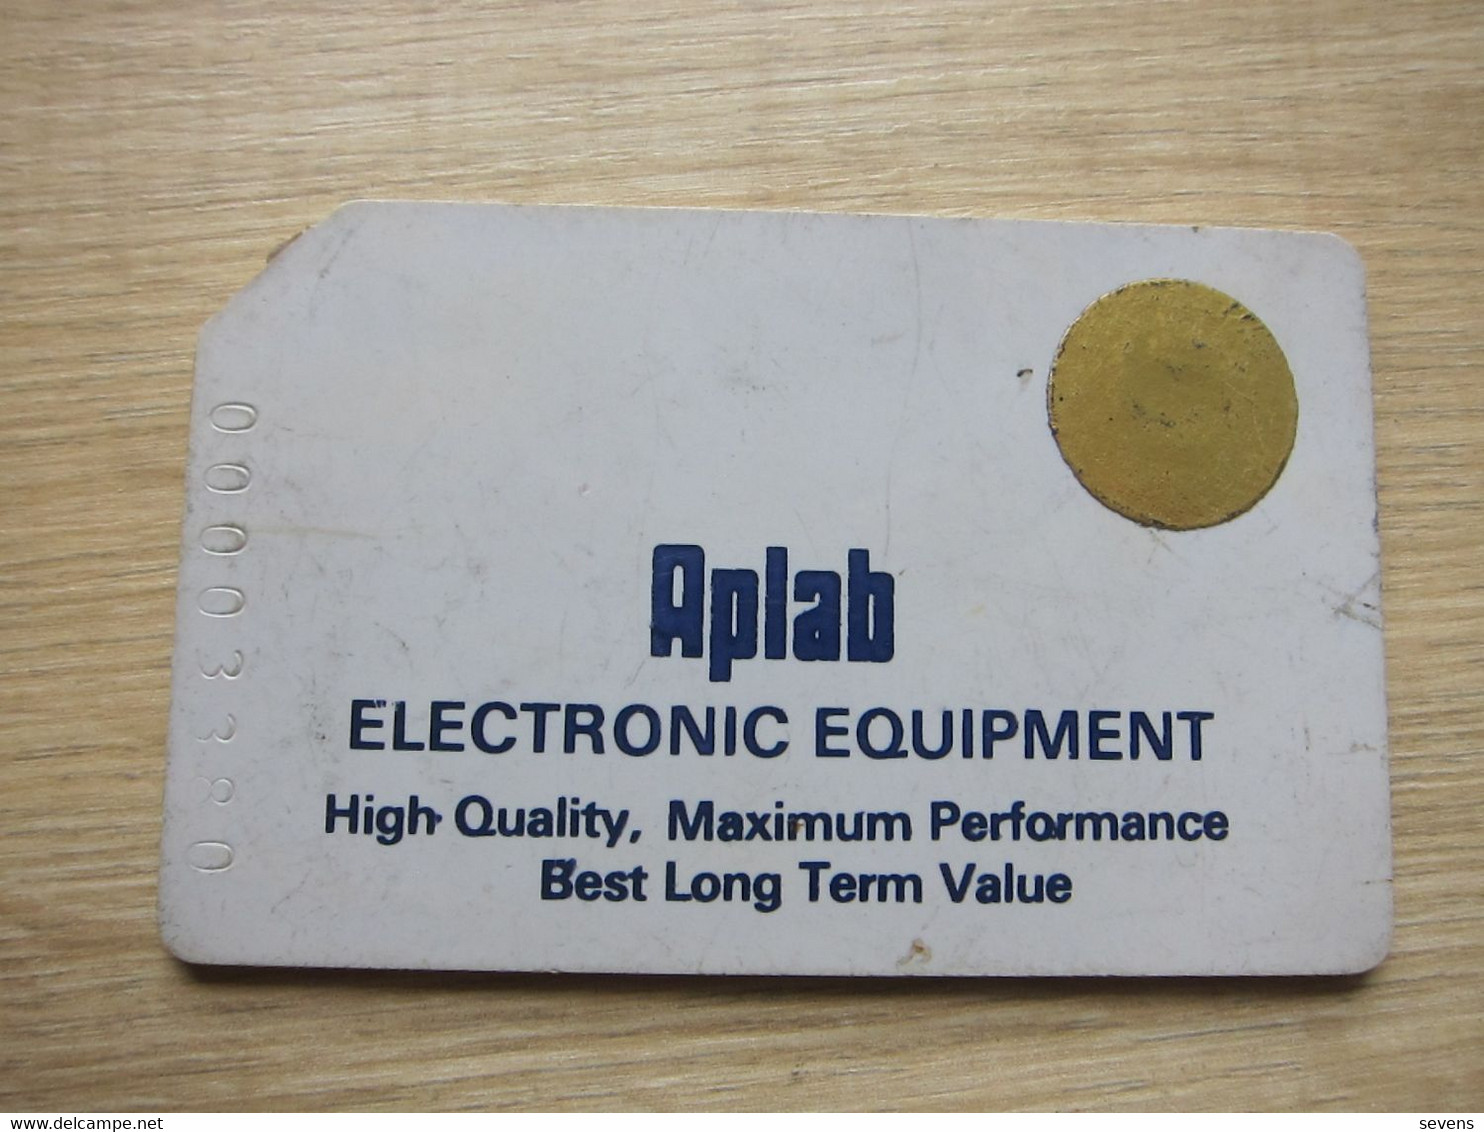 Aplab LOKDOOT Chip Phonecard, LOK02d, Backside 8 Digit Serial Number, Used,backside With Gold Cover - India